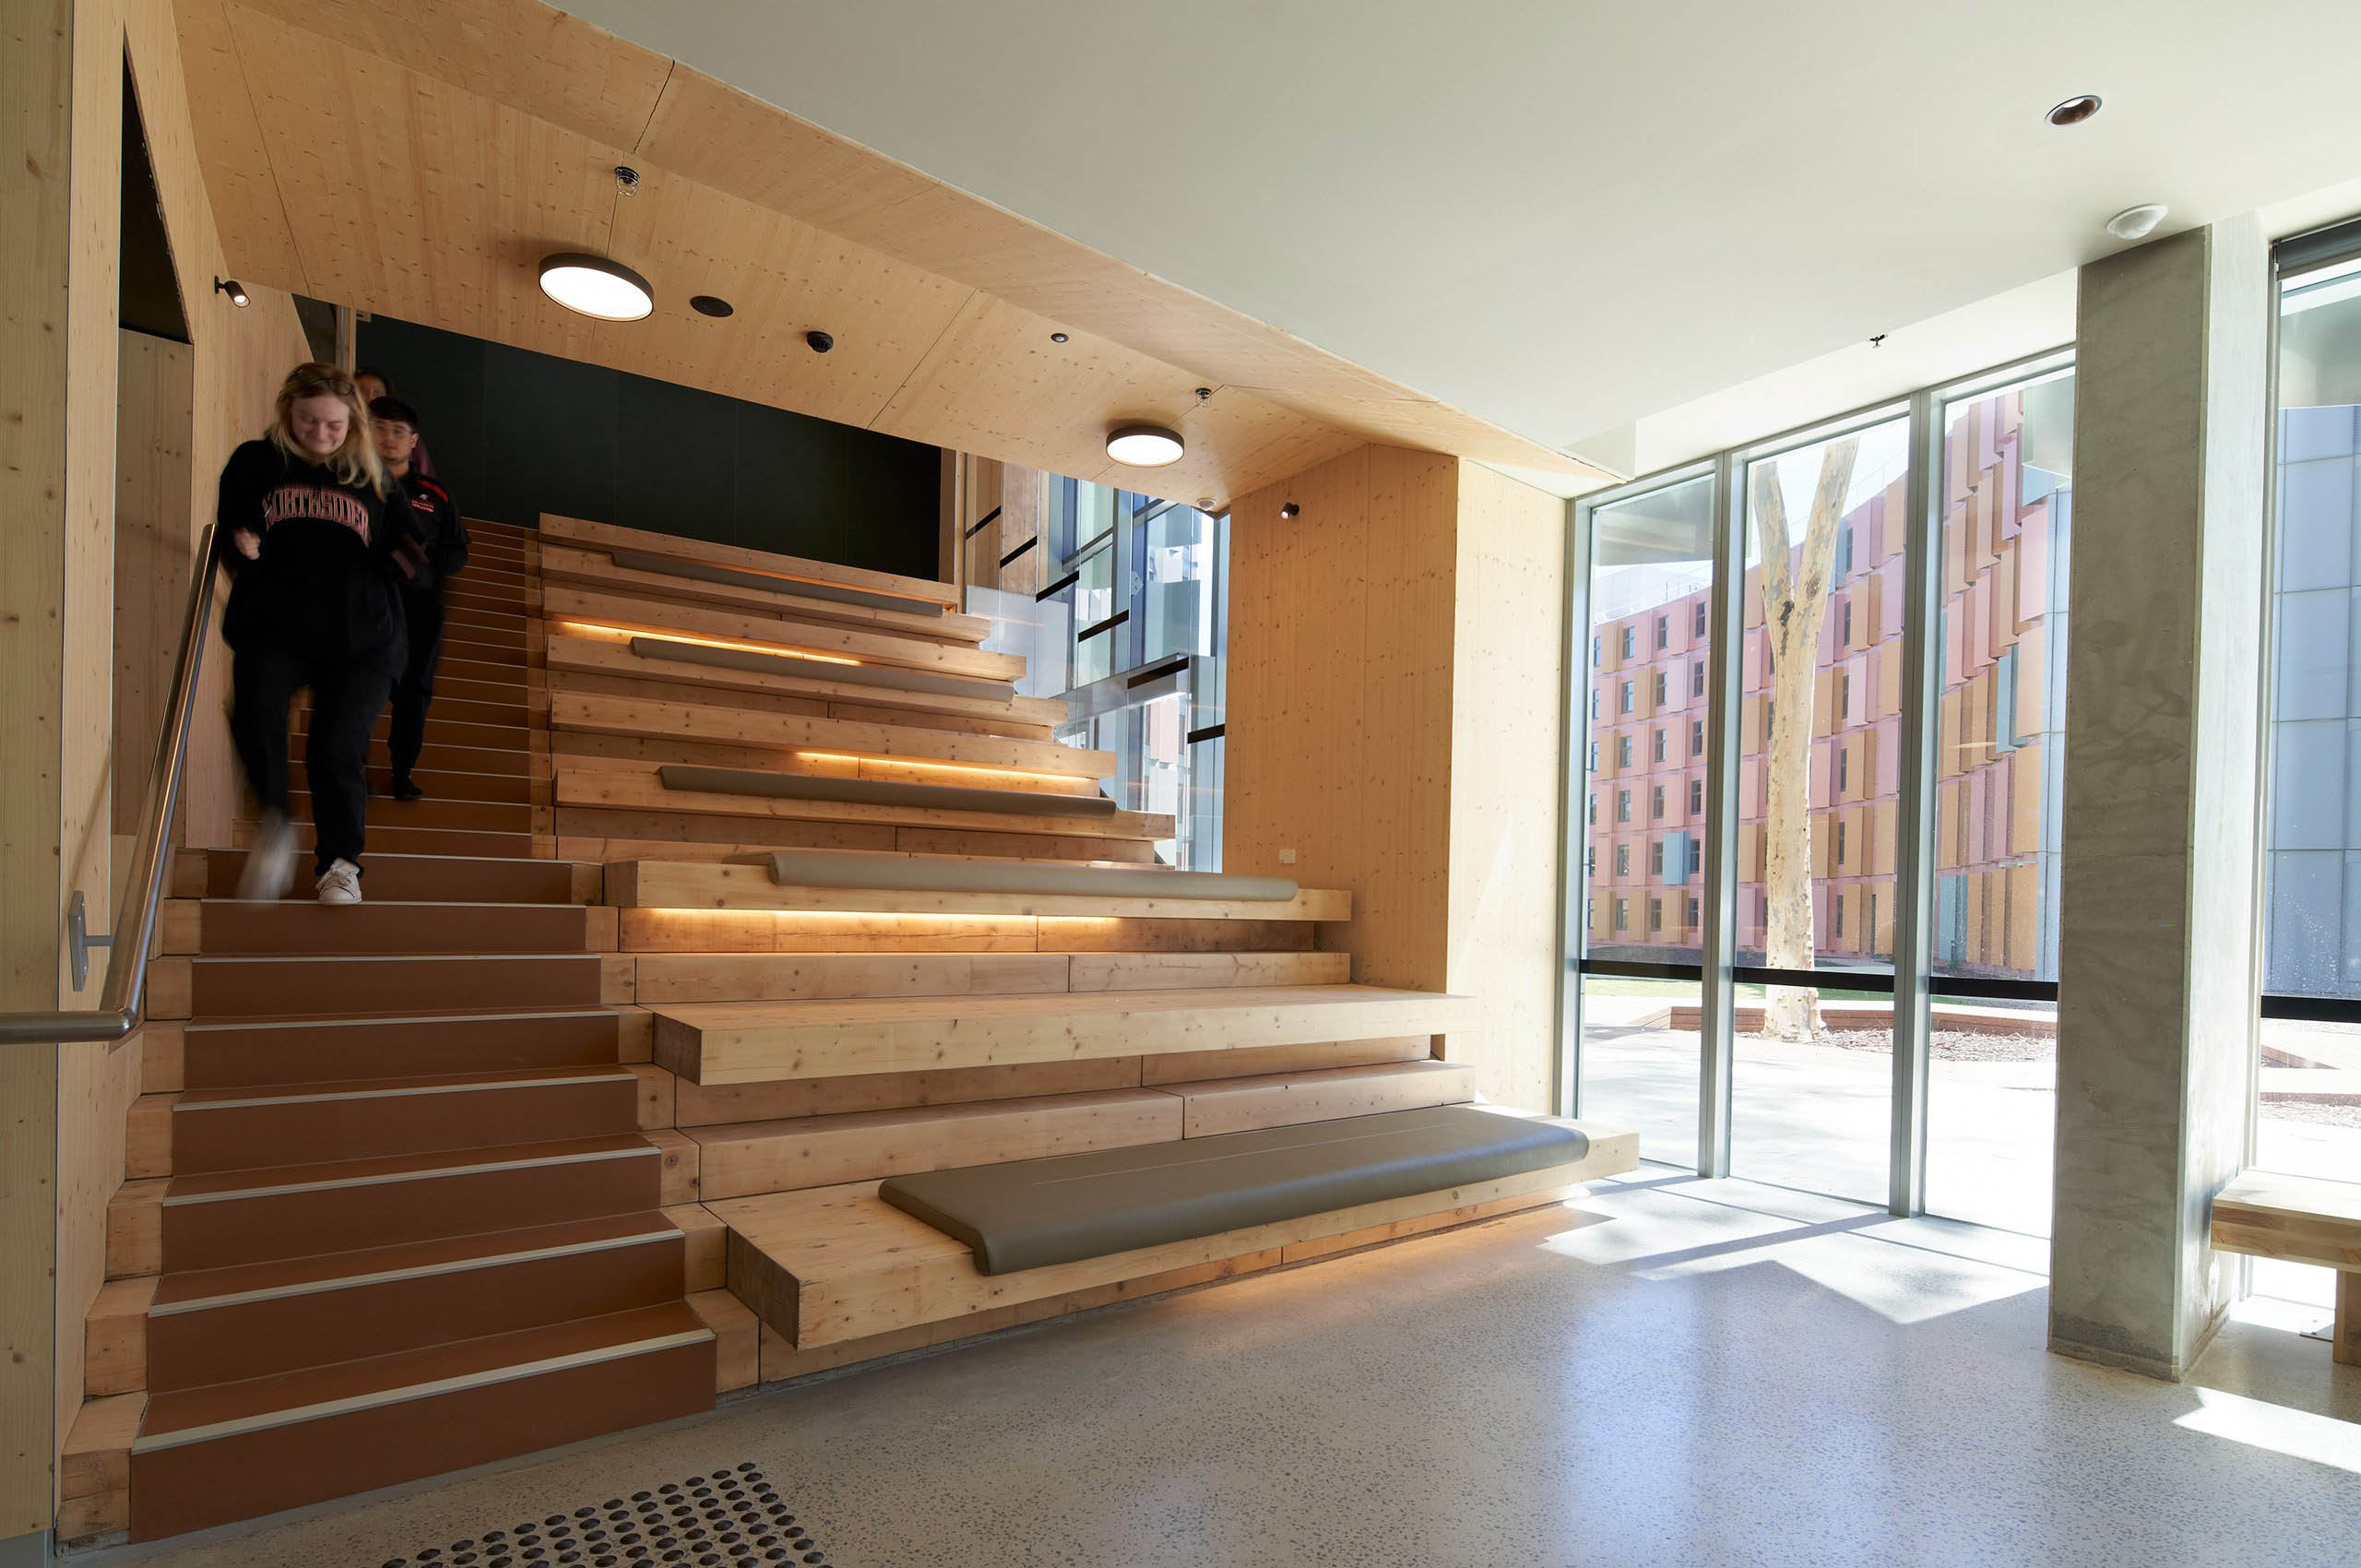 A vast, light-filled, timber staircase provides students with additional space to meet and socialise.